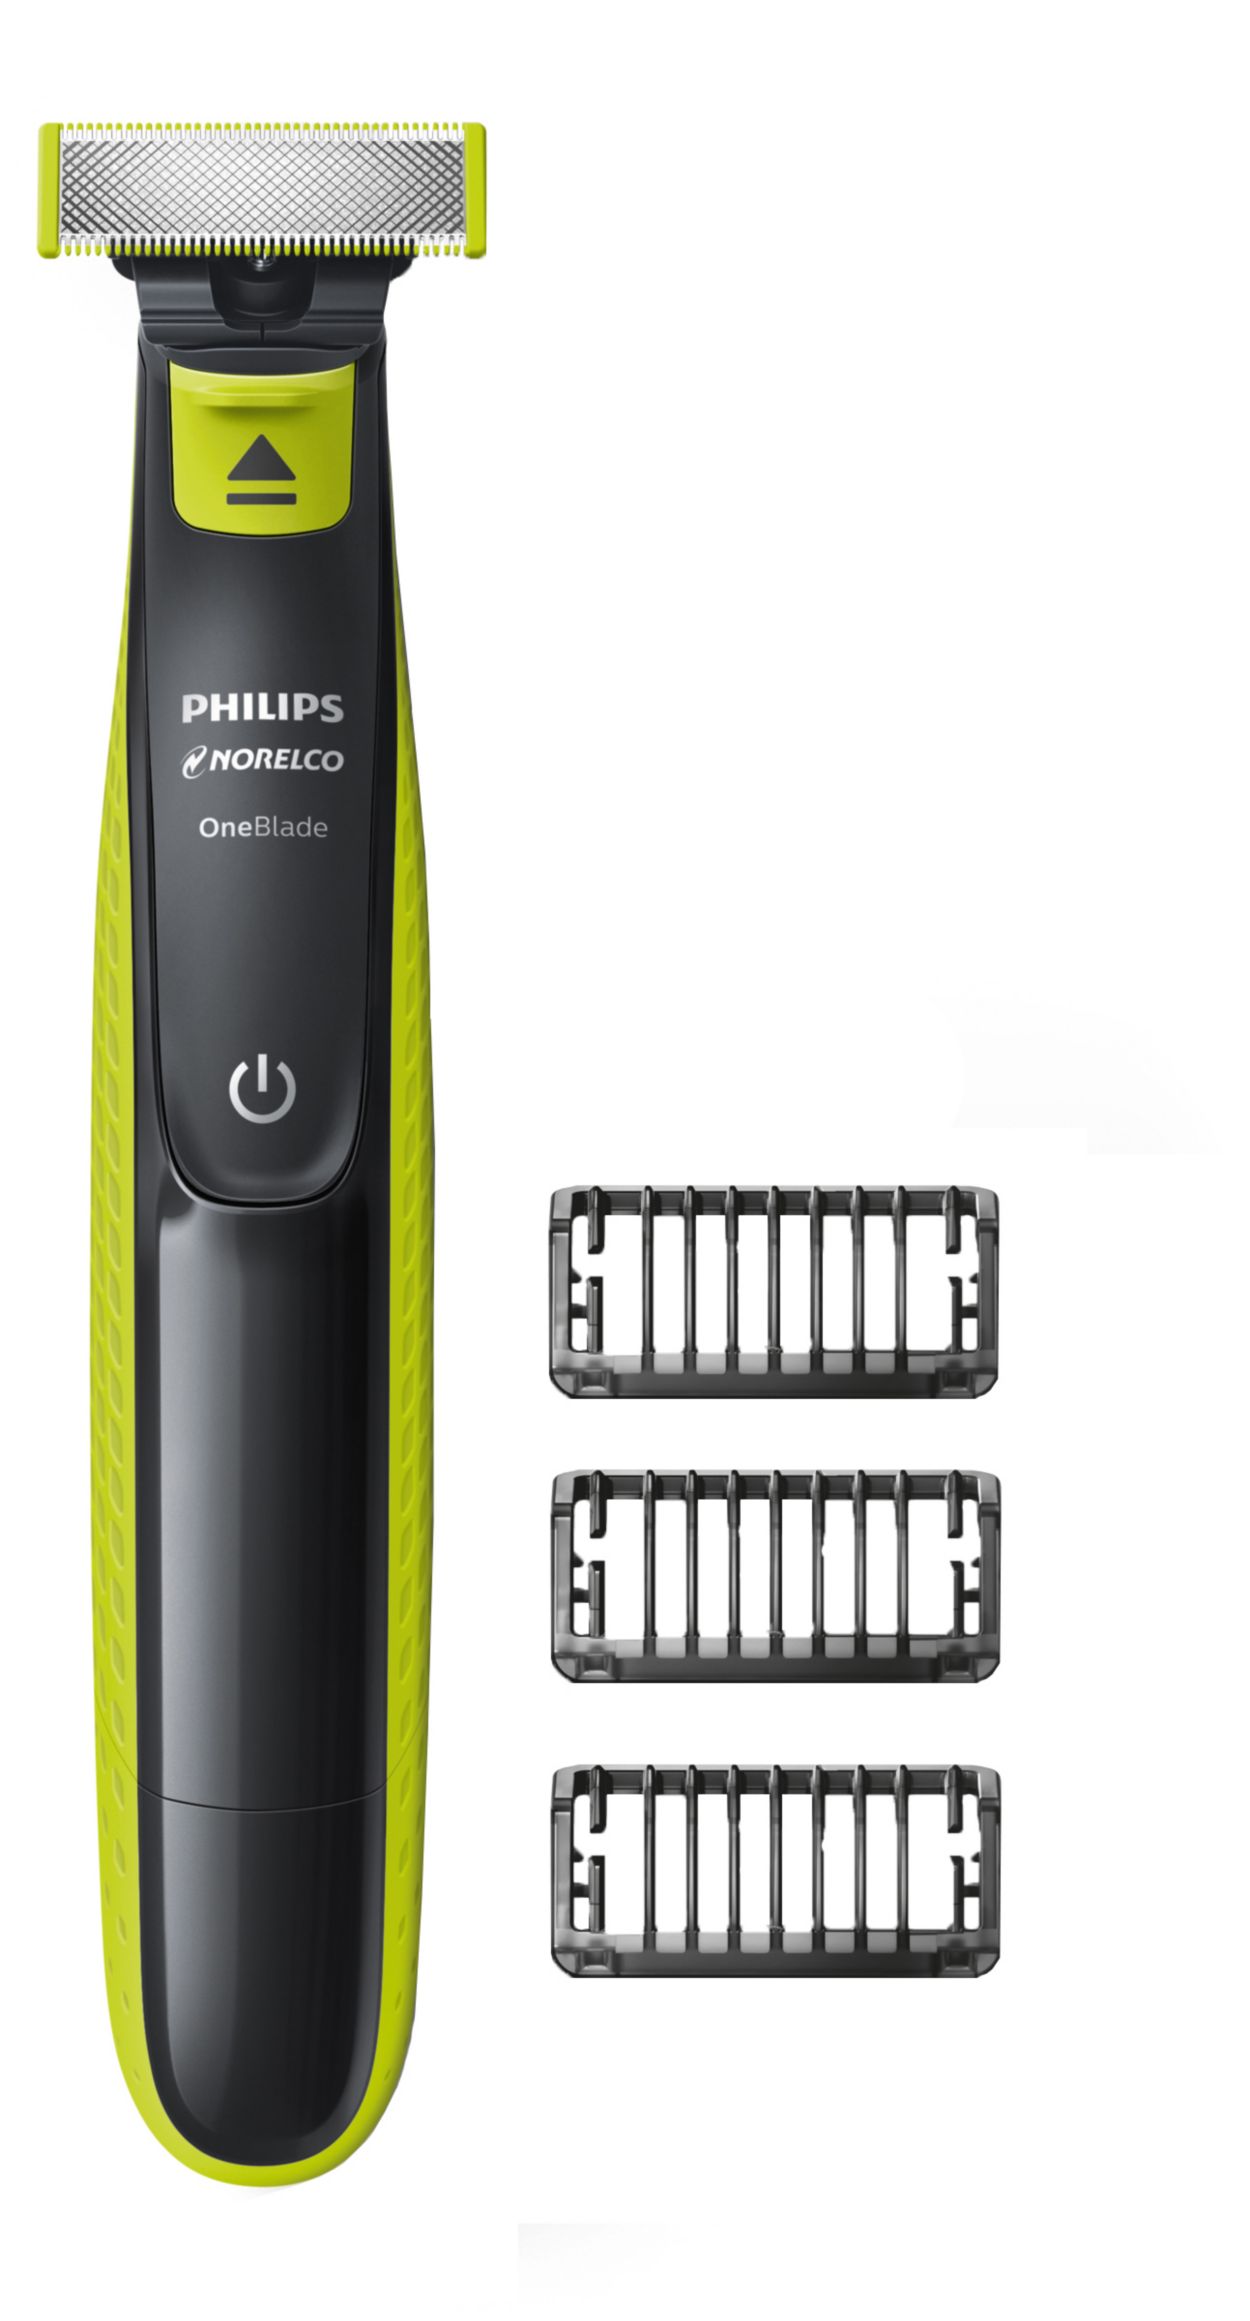 Philips Norelco Oneblade 360 Face + Body, Hybrid Electric Razor and Beard  Trimmer For Men with 5-In-1 Face Stubble Comb and Body Hair Trimmer Kit